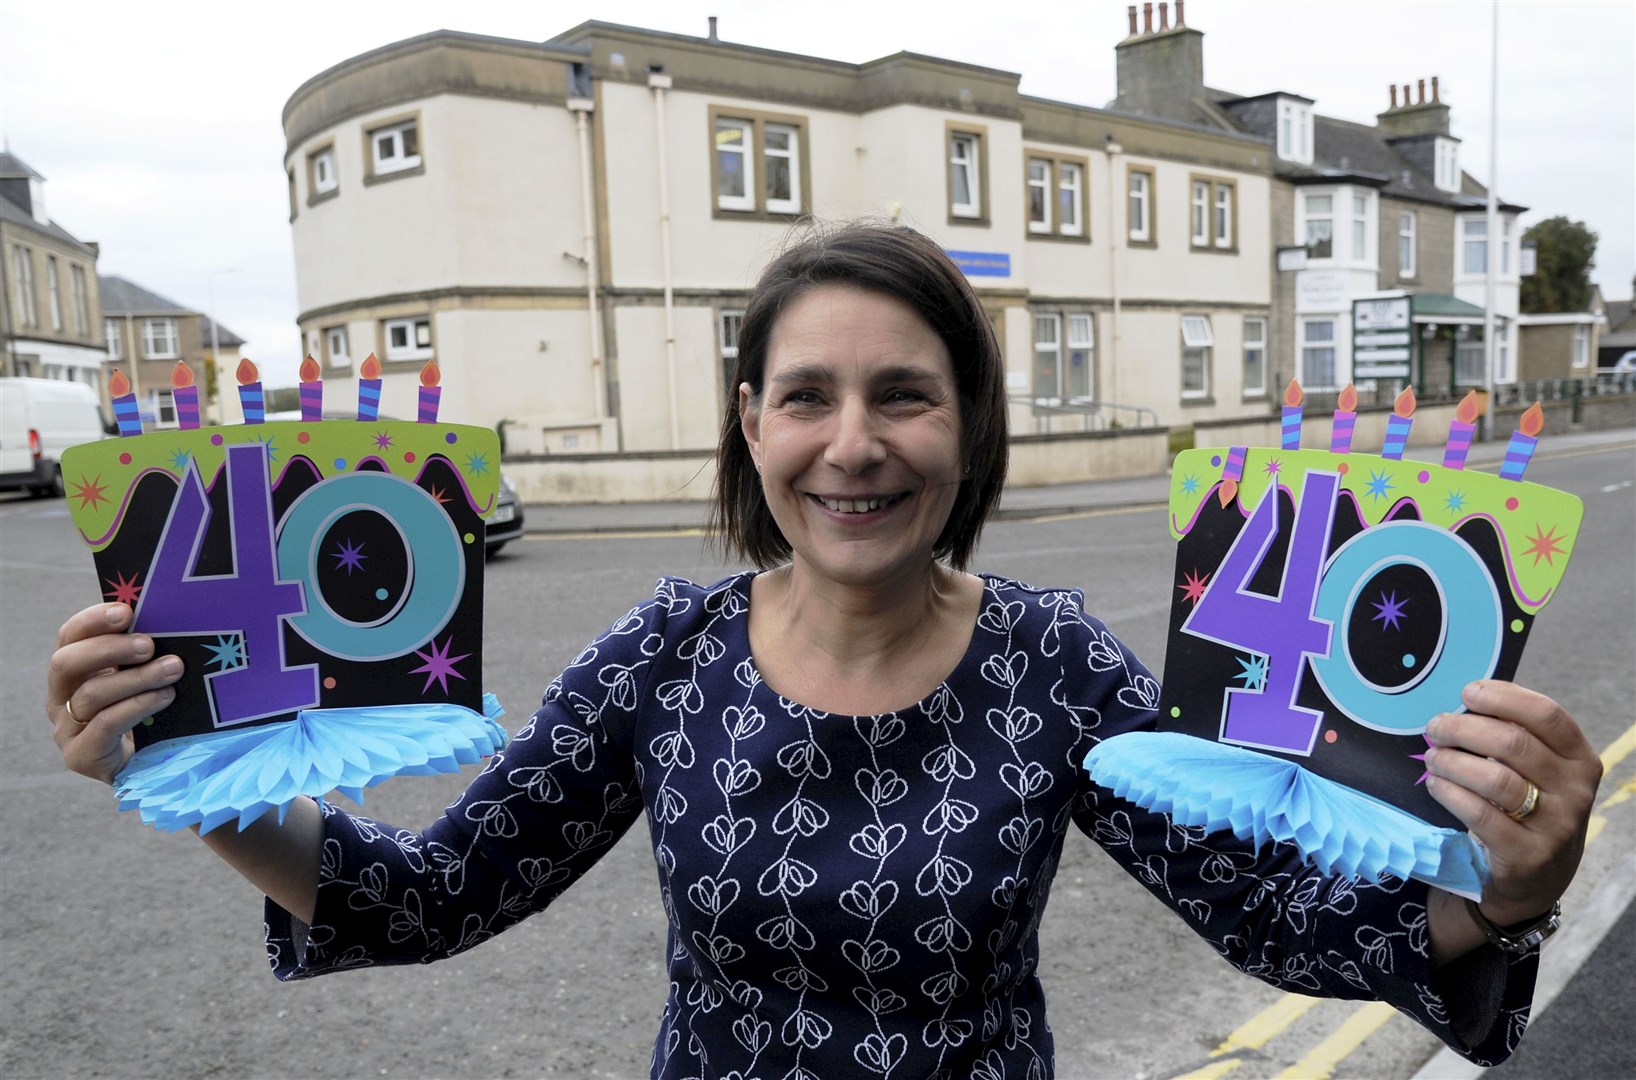 Moray Citizen's Advice Bureau's 40th anniversary. Mary Riley, the manager, has worked at the company since 2000.